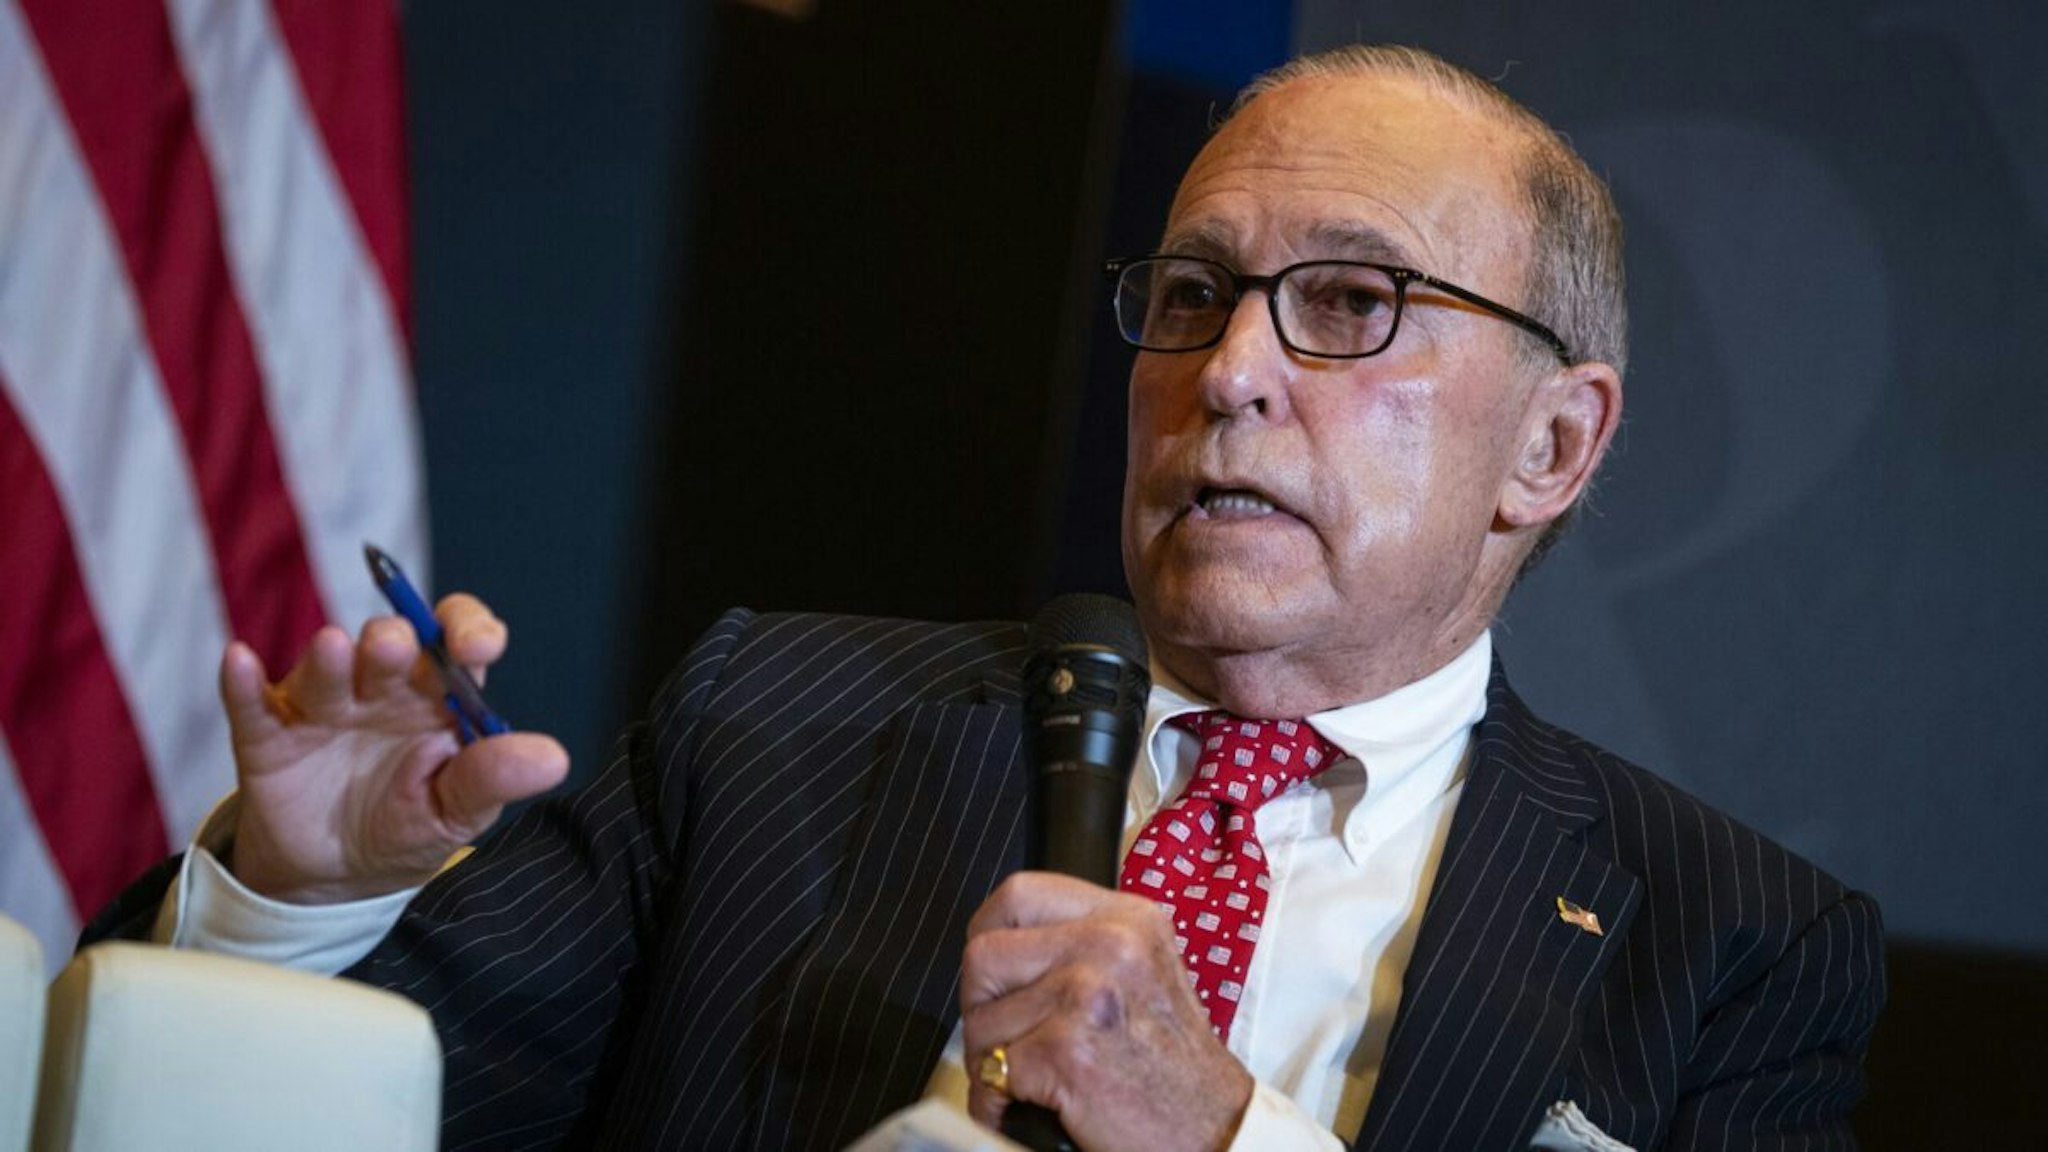 Larry Kudlow, former director of the US National Economic Council, speaks during the America First Policy Institute's America First Agenda Summit in Washington, D.C., US, on Tuesday, July 26, 2022.